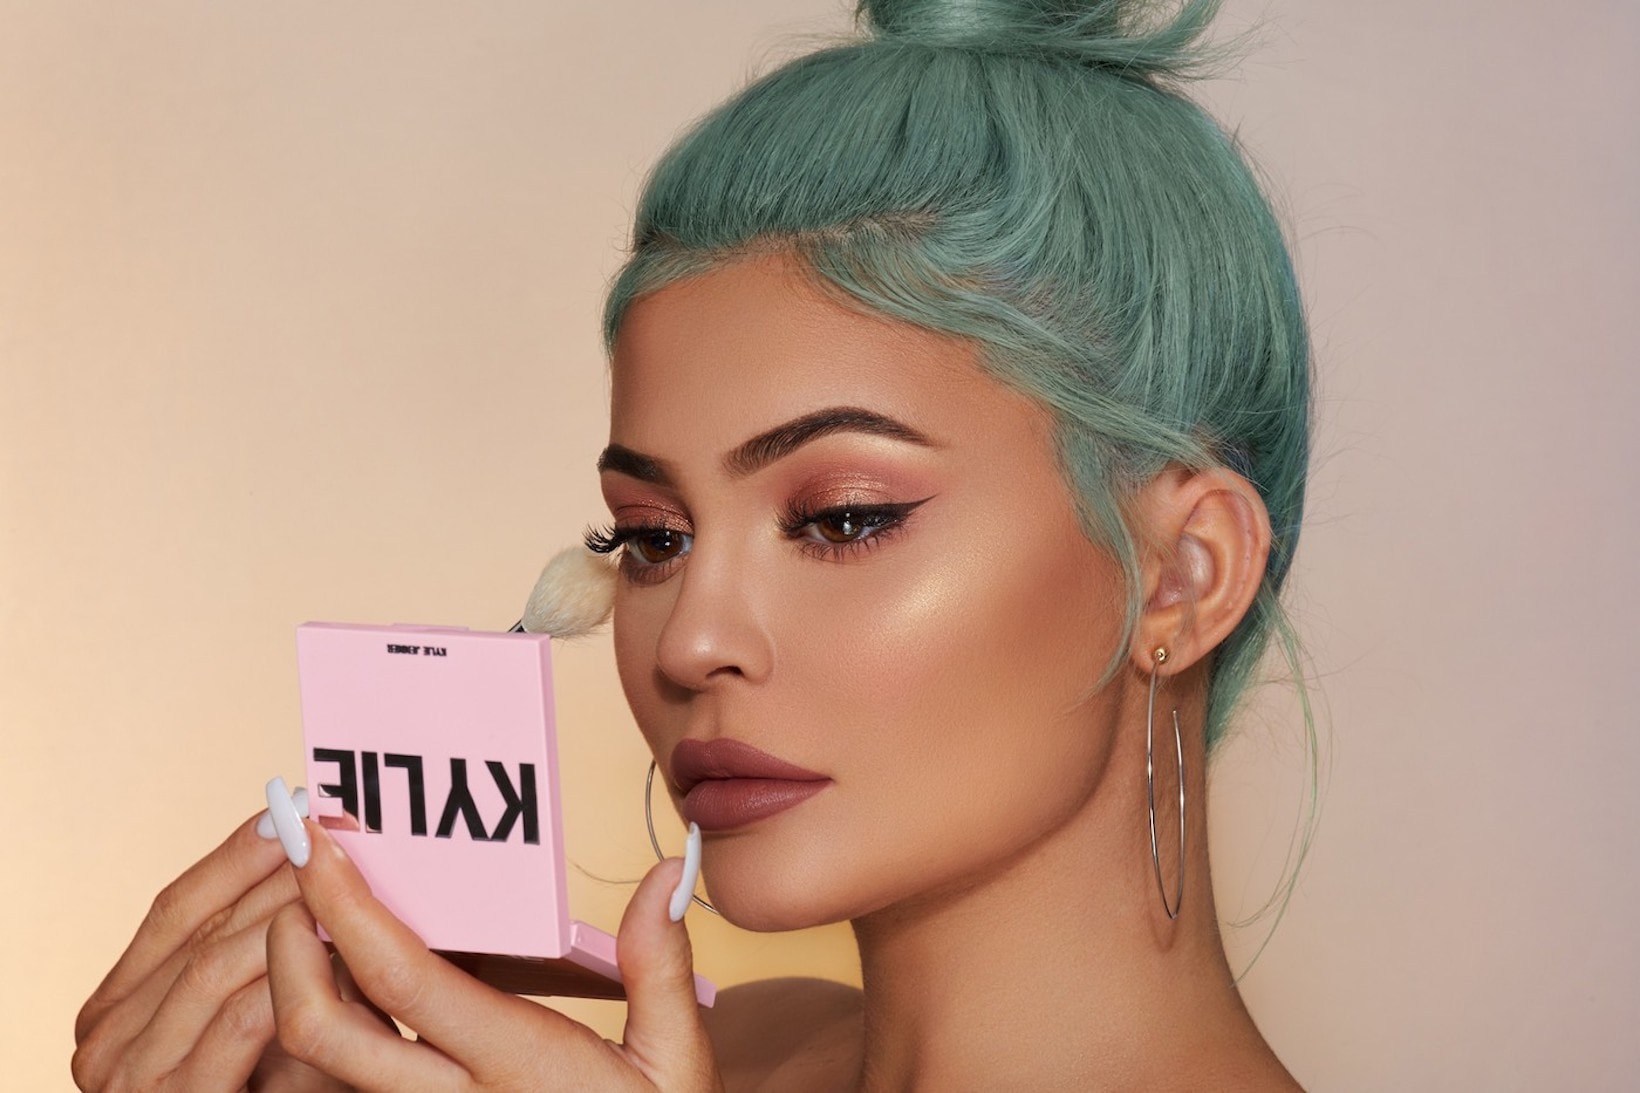 Kylie Jenner Launches New Lipstick Collection (Exclusive)